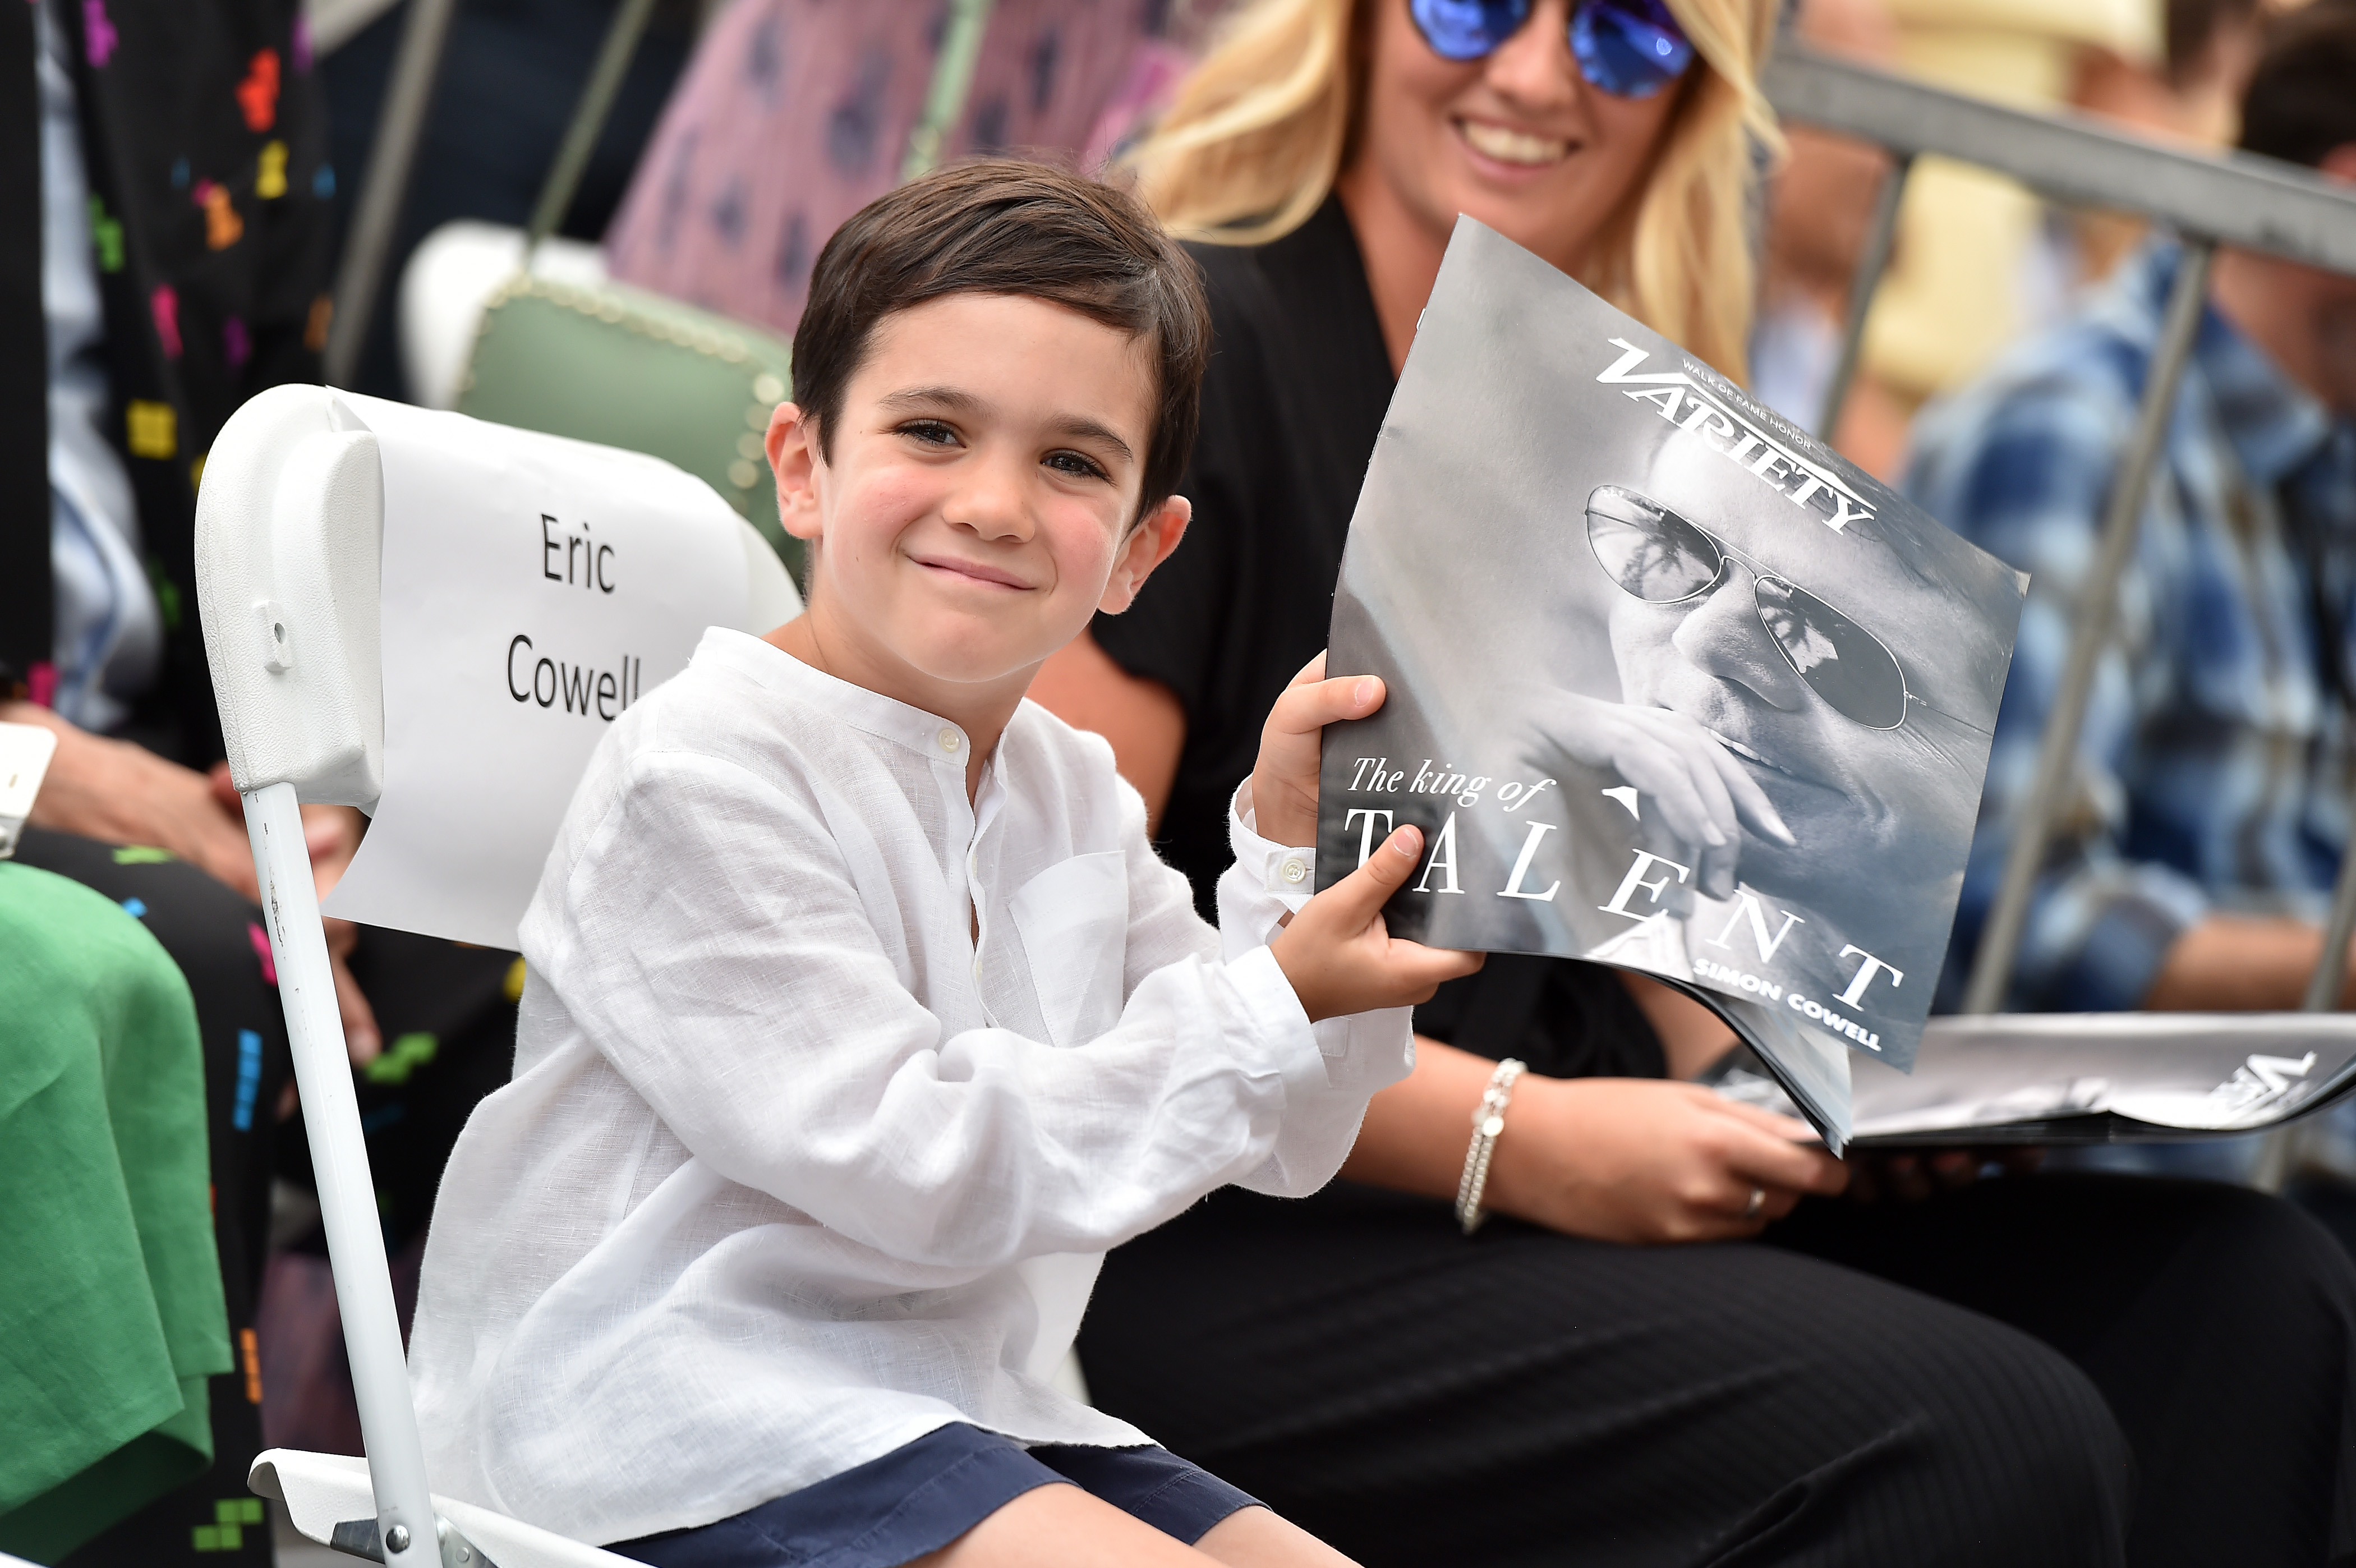 Eric Cowell at the ceremony honoring his father, Simon Cowell, with a star on the Hollywood Walk of Fame on August 22, 2018, in Hollywood, California | Source: Getty Images